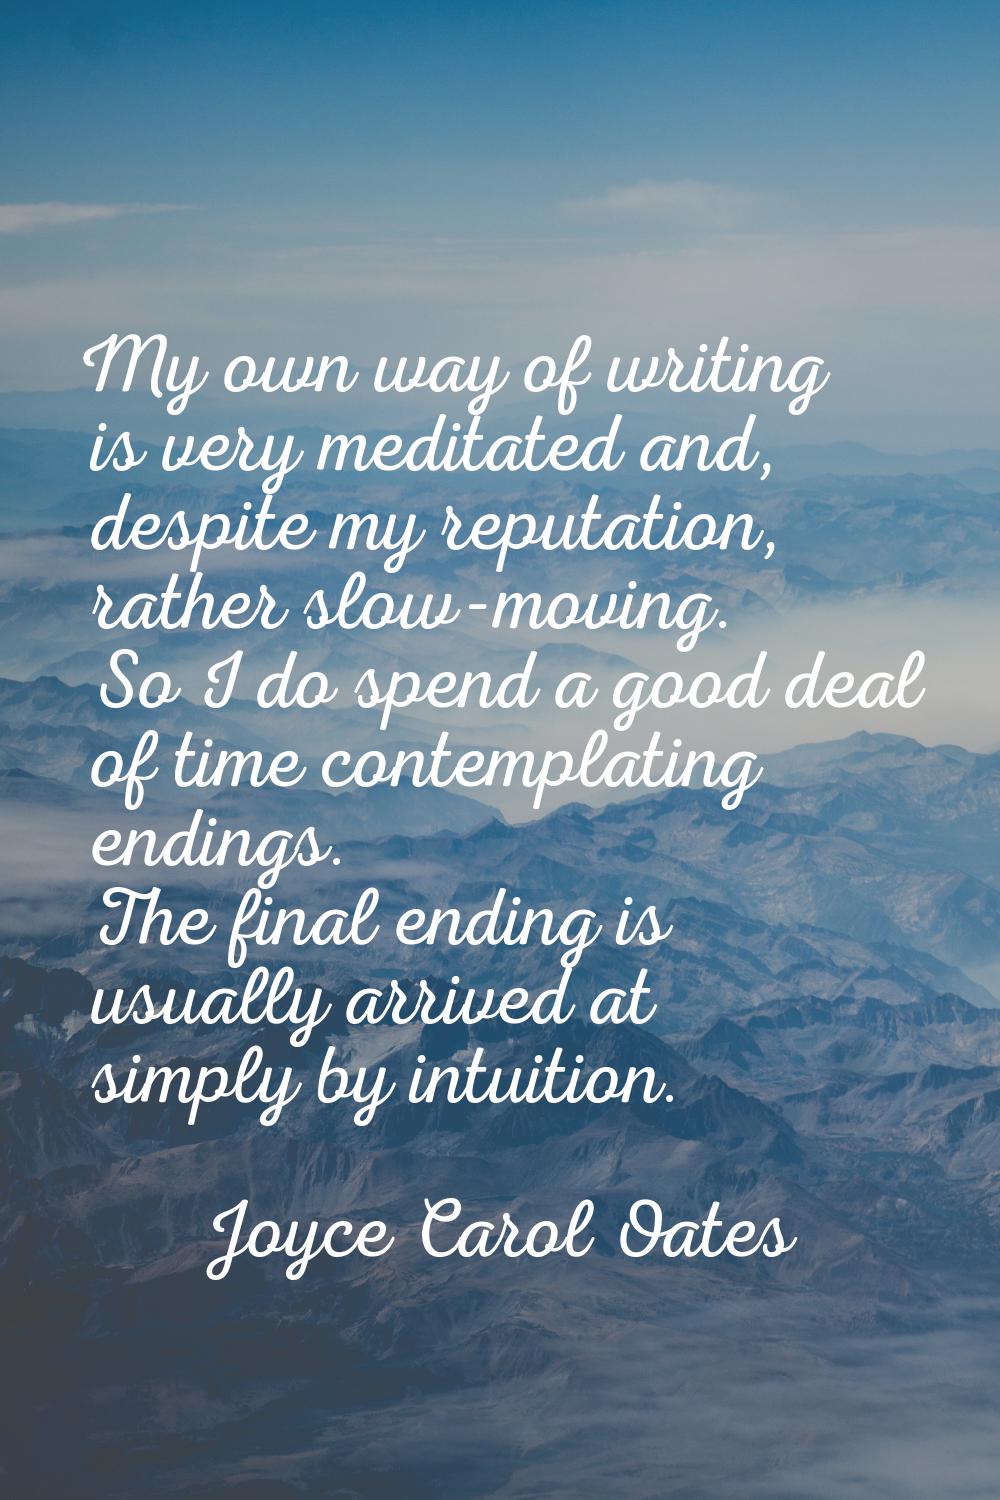 My own way of writing is very meditated and, despite my reputation, rather slow-moving. So I do spe